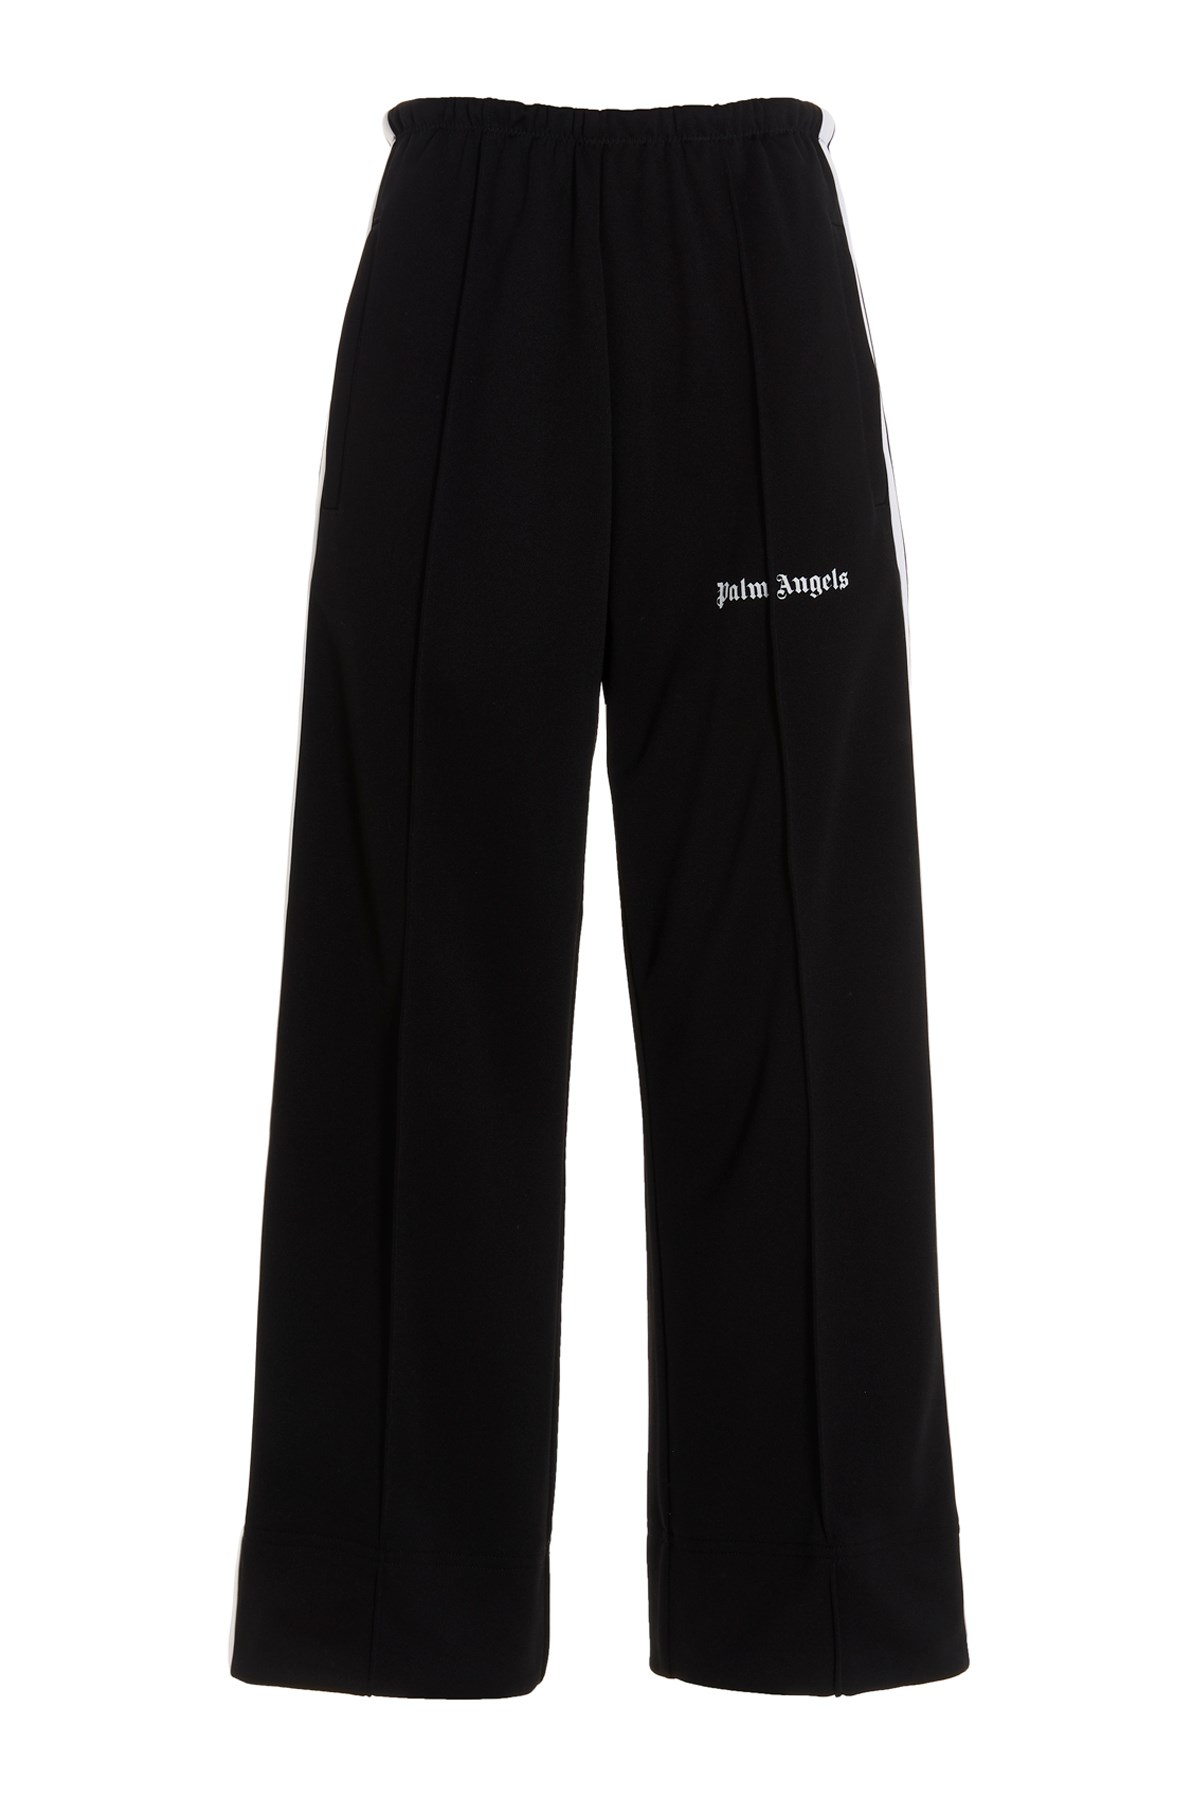 PALM ANGELS 'Track Cropped' Joggers